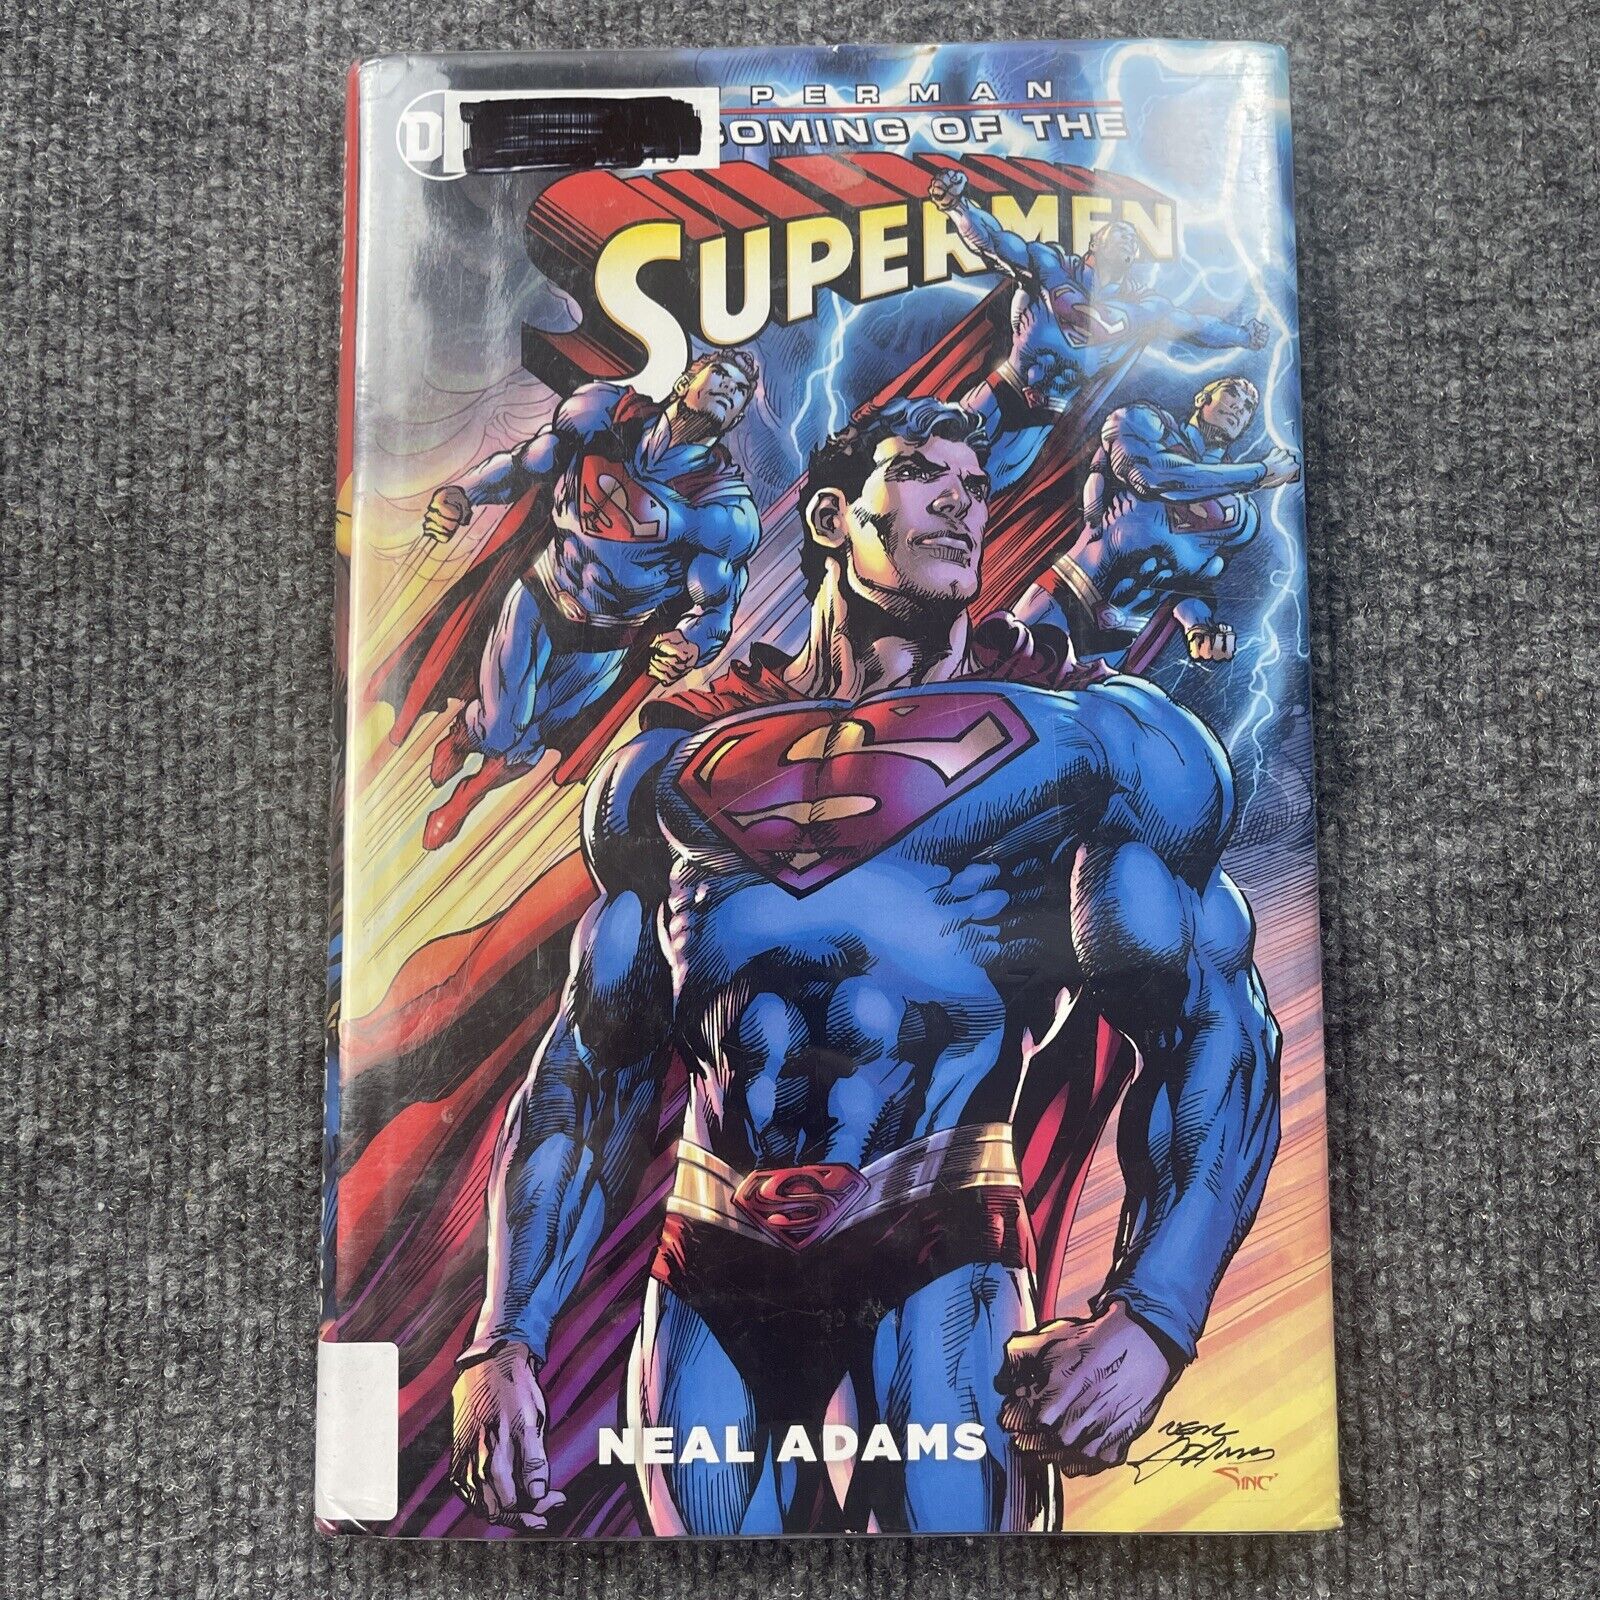 Superman: The Coming of the Supermen by Adams (hardcover)